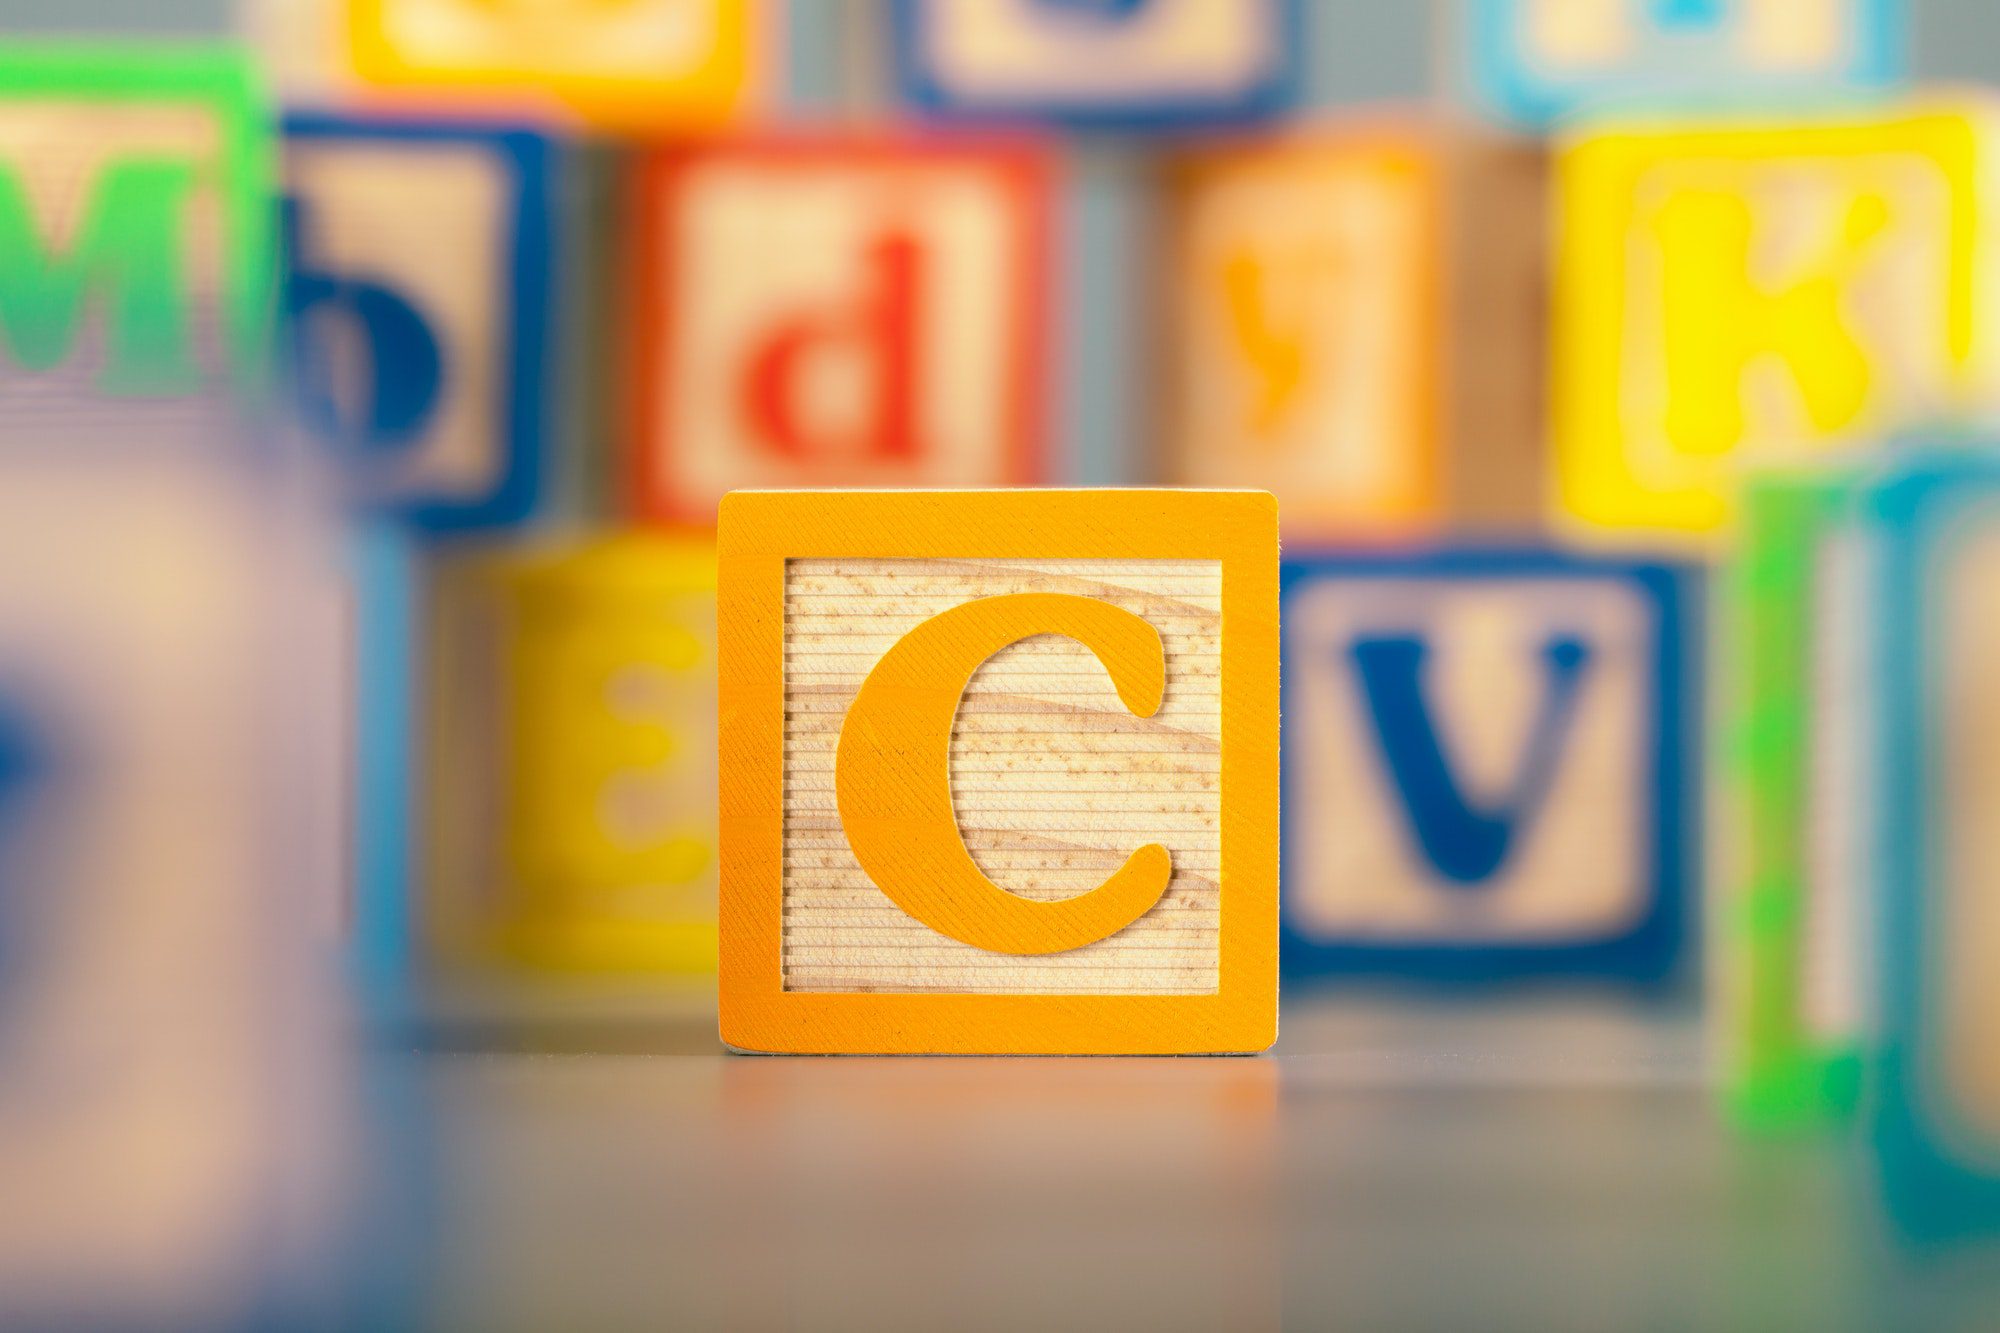 Photograph of colorful Wooden Block Letter C referring to Creditable Coverage for Medicare